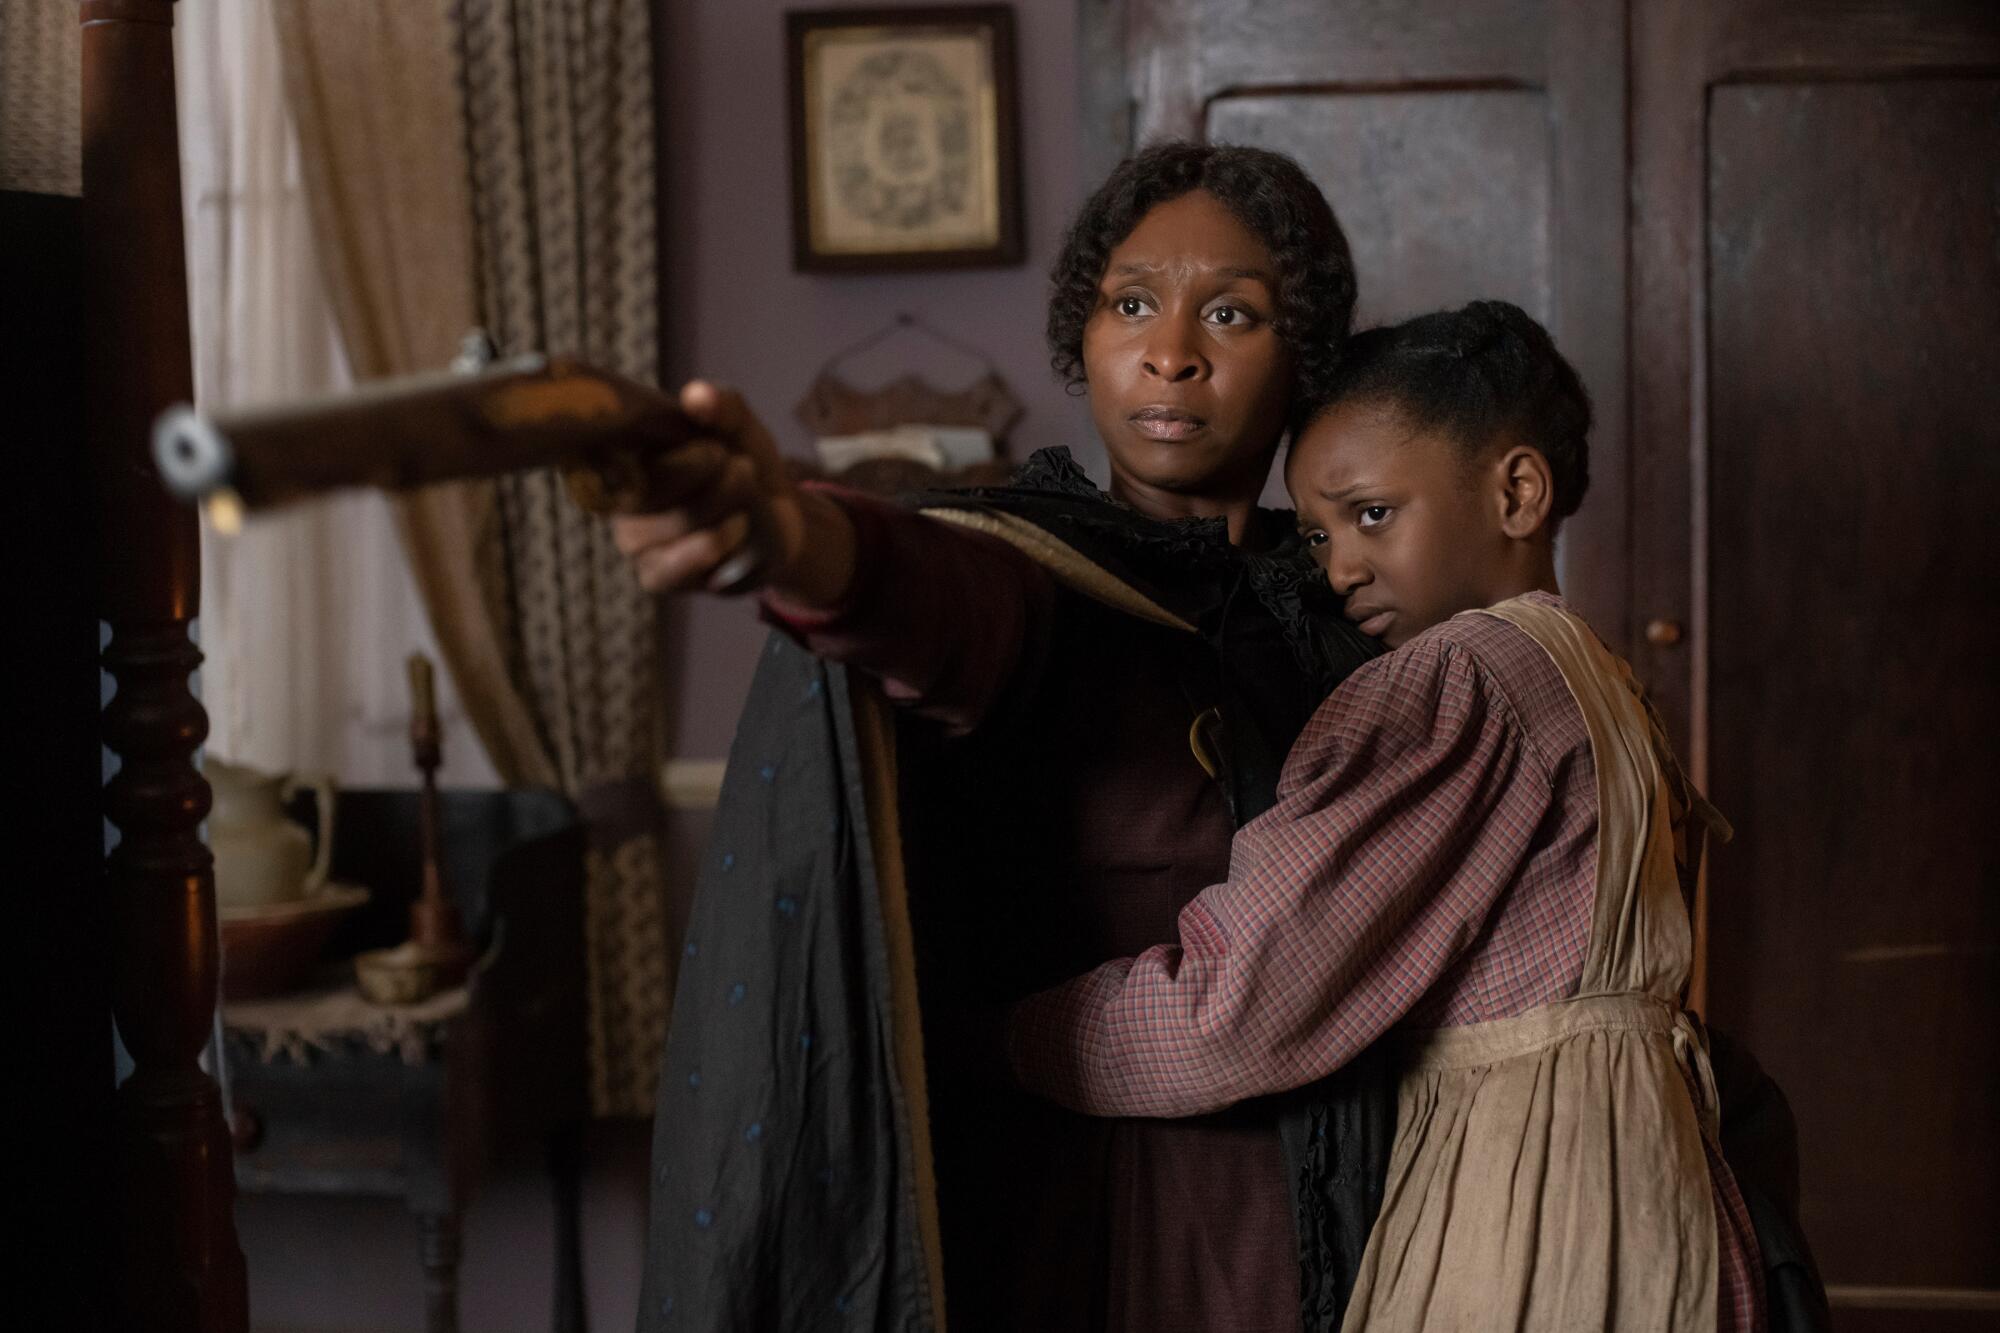 Cynthia Erivo stars as Harriet Tubman and Aria Brooks as Anger in "Harriet" for which Erivo was nominated for an Oscar.